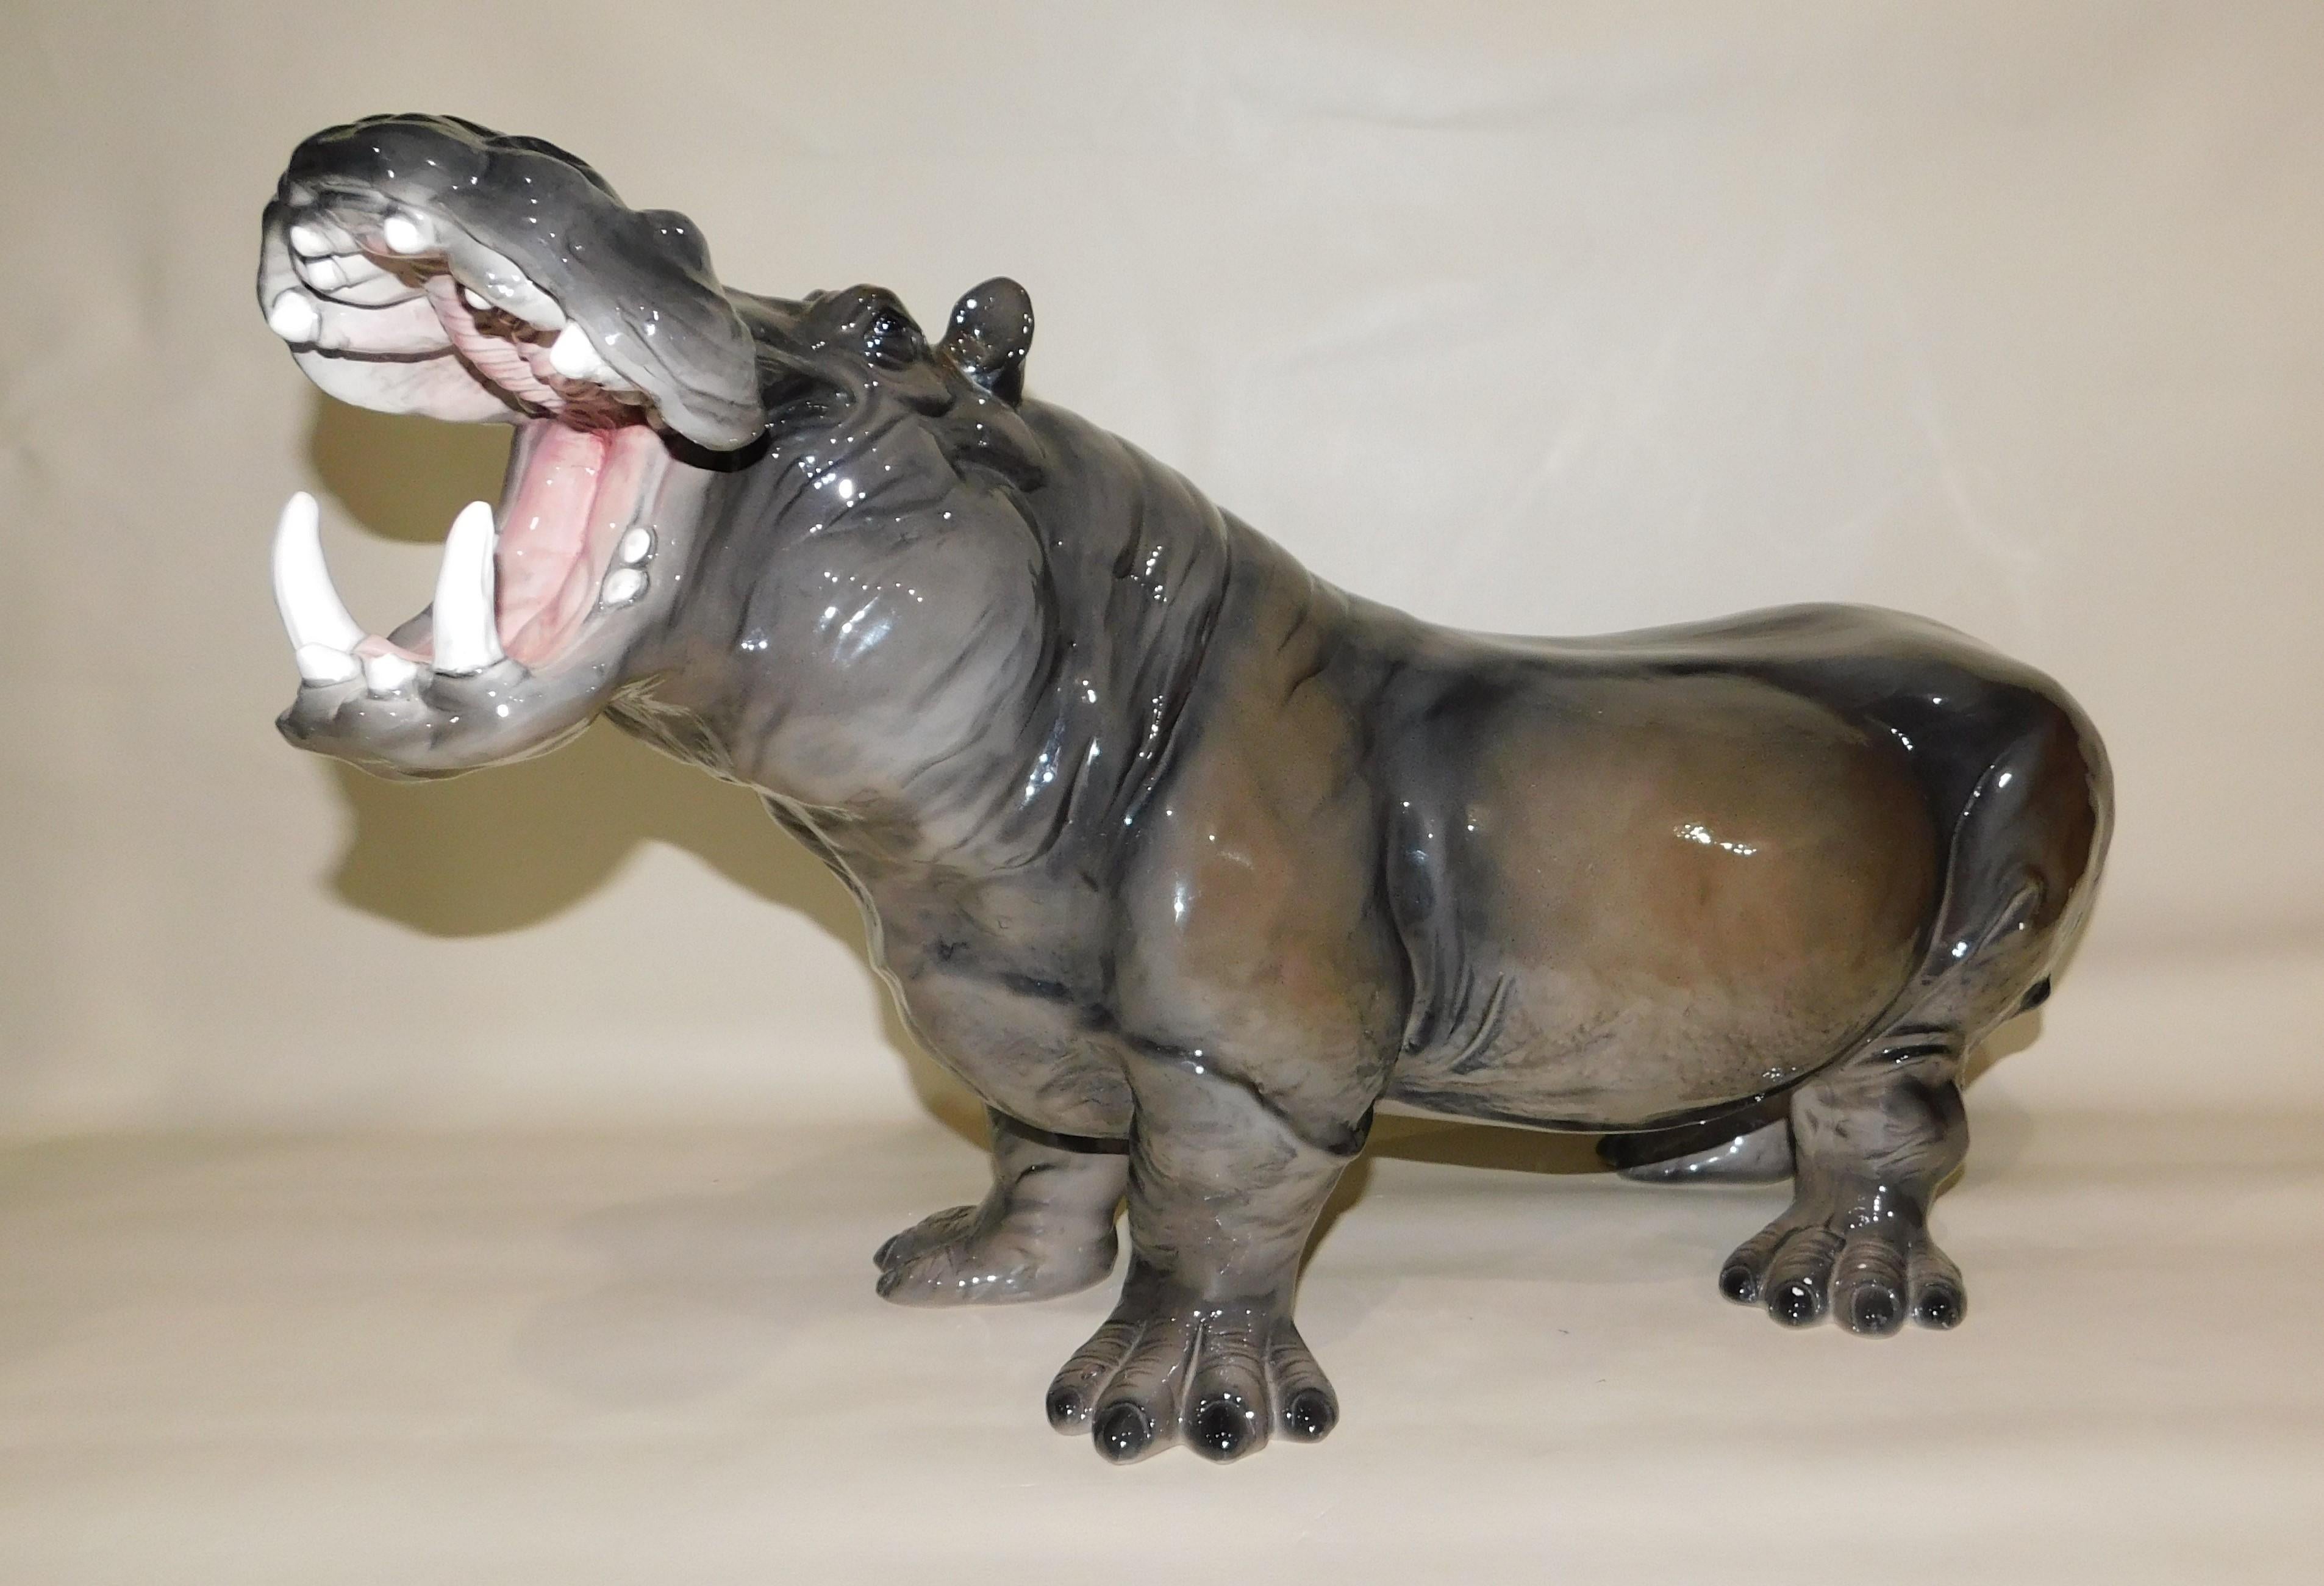 Handmade, painted and glazed in Italy, large Mid-Century Modern ceramic hippopotamus, circa 1960. This rare charming sculpture presents an accurate and detailed depiction of a fierce hippo with it's mouth wide open showing its teeth. Over two feet